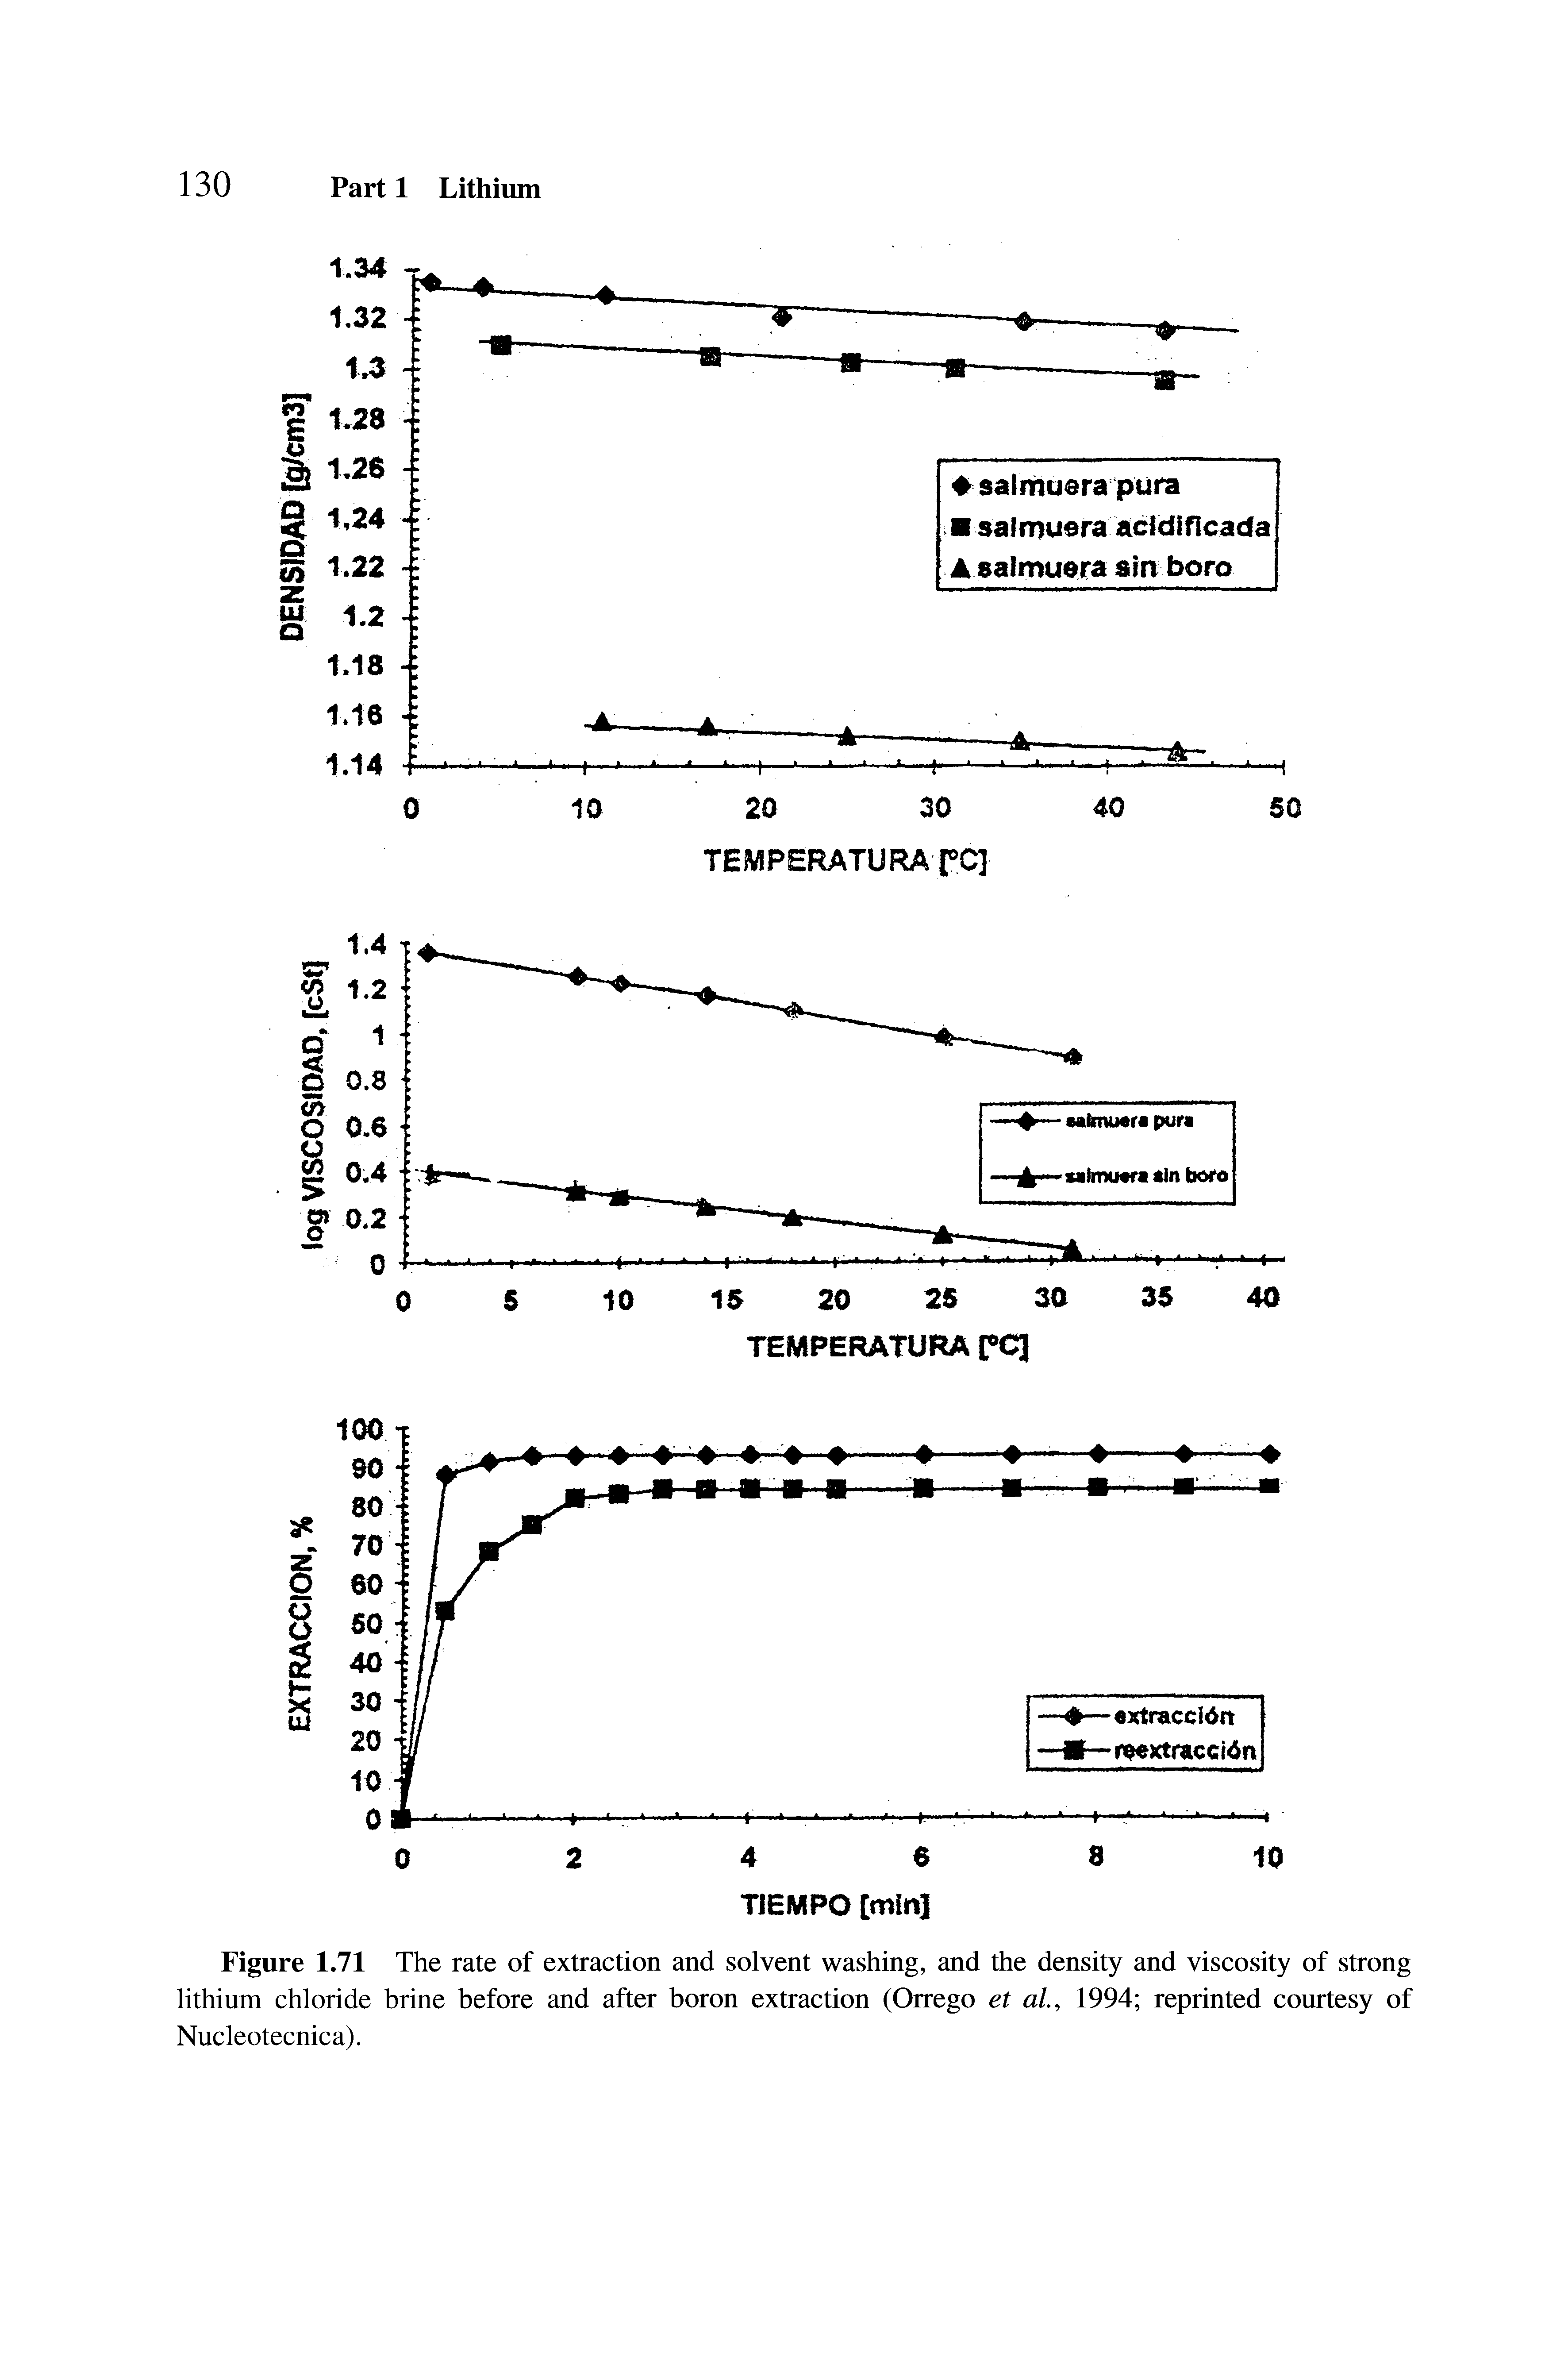 Figure 1.71 The rate of extraction and solvent washing, and the density and viscosity of strong lithium chloride brine before and after boron extraction (Orrego et al, 1994 reprinted courtesy of Nucleotecnica).